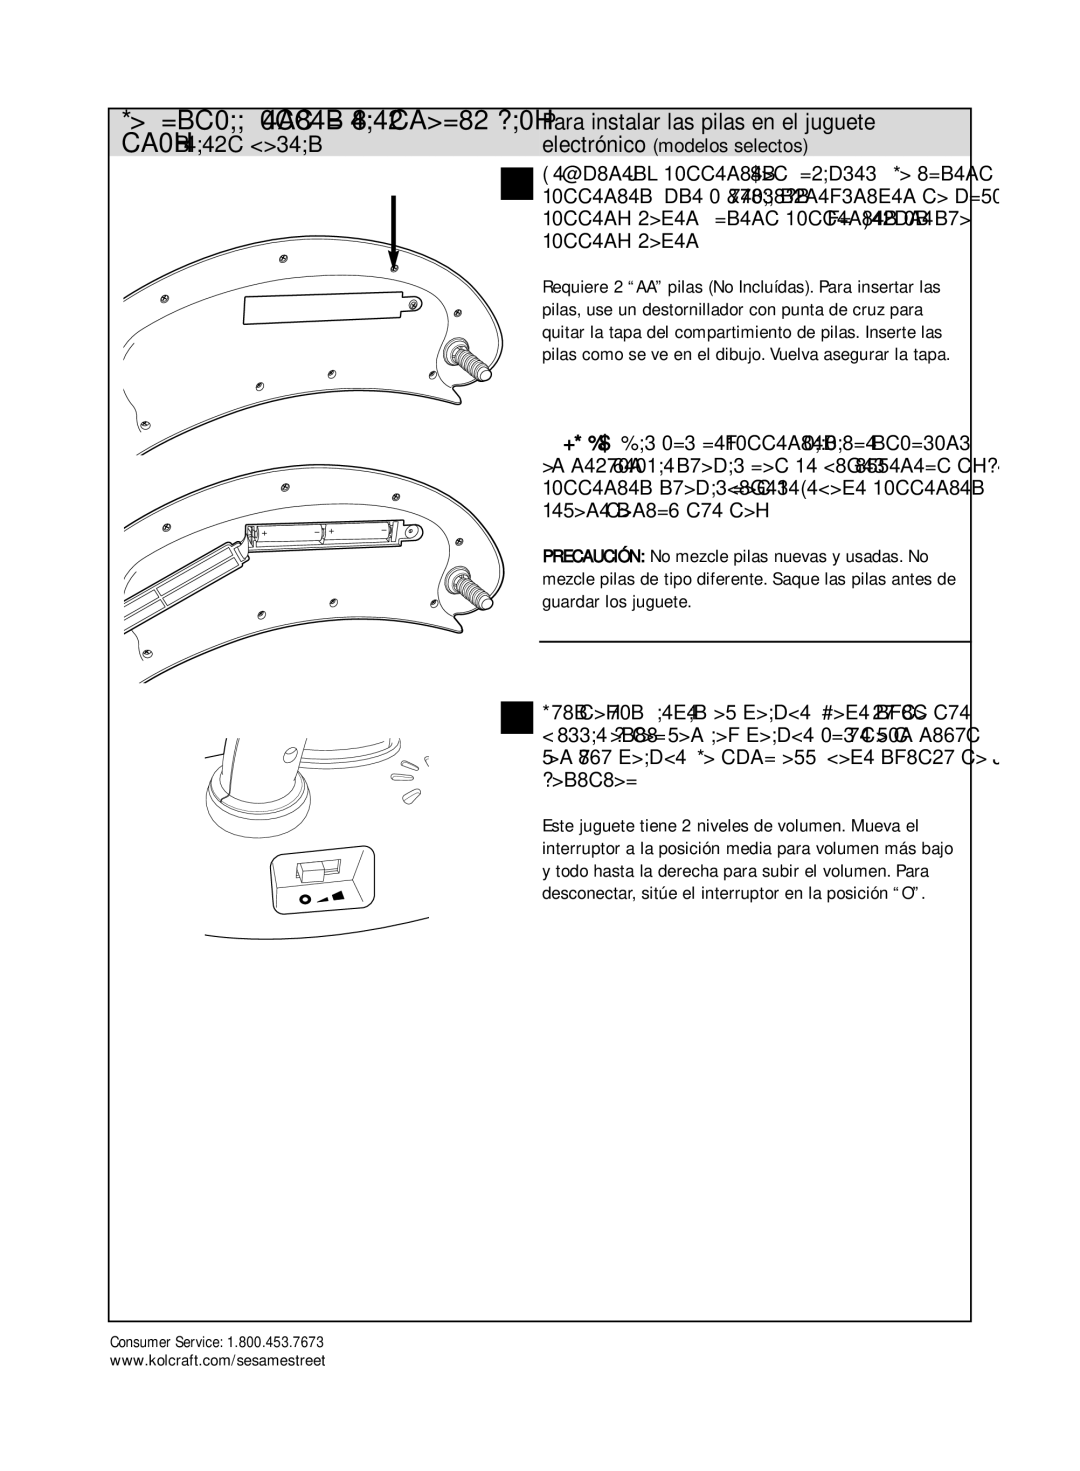 Kolcraft W025-R2 instruction sheet To Install Batteries in electronic play tray select models 